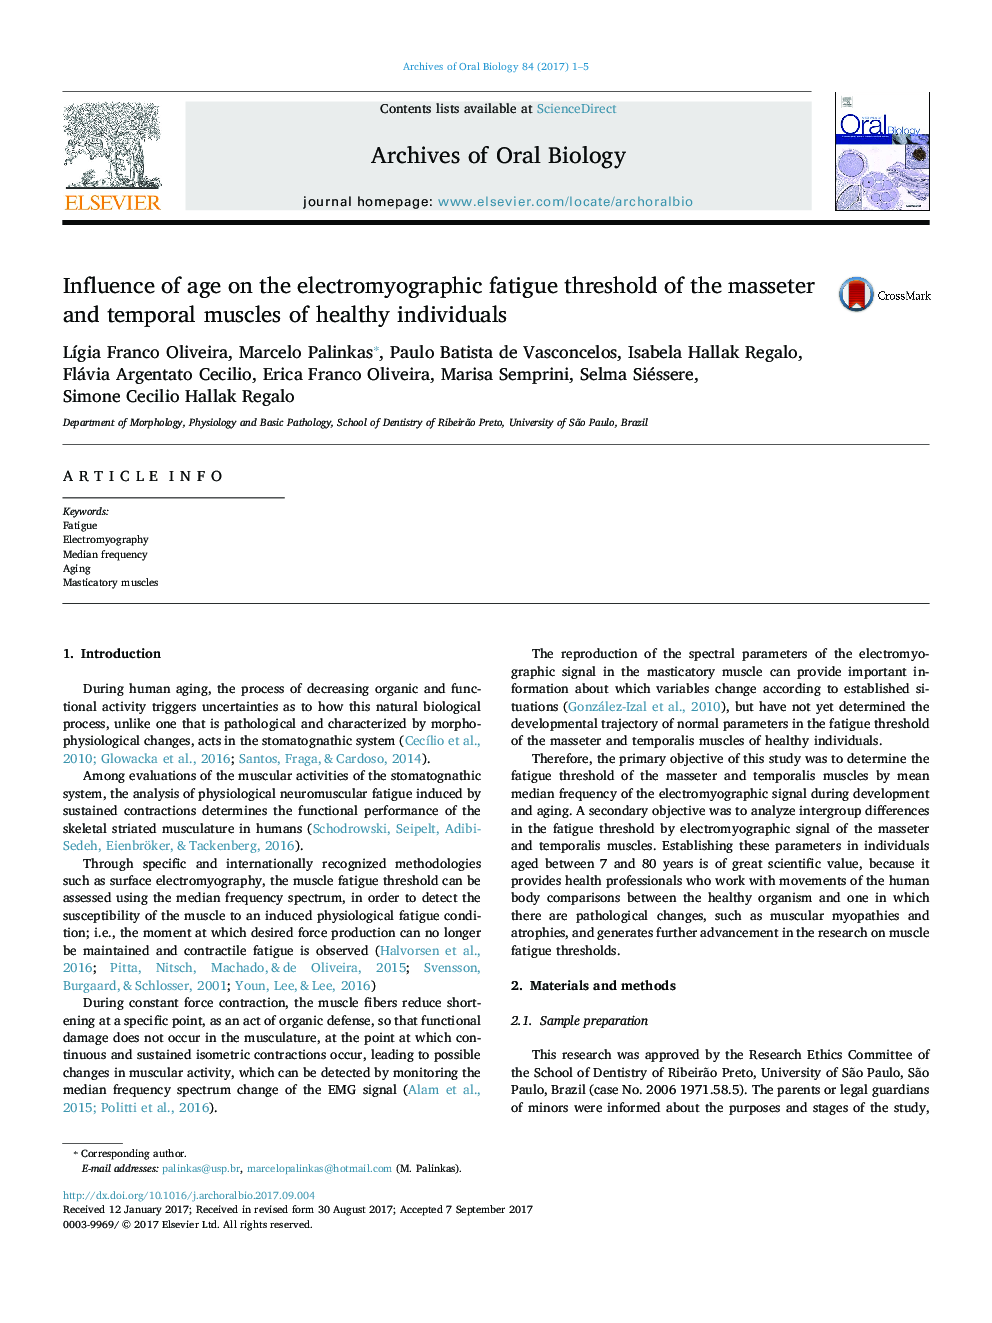 Influence of age on the electromyographic fatigue threshold of the masseter and temporal muscles of healthy individuals